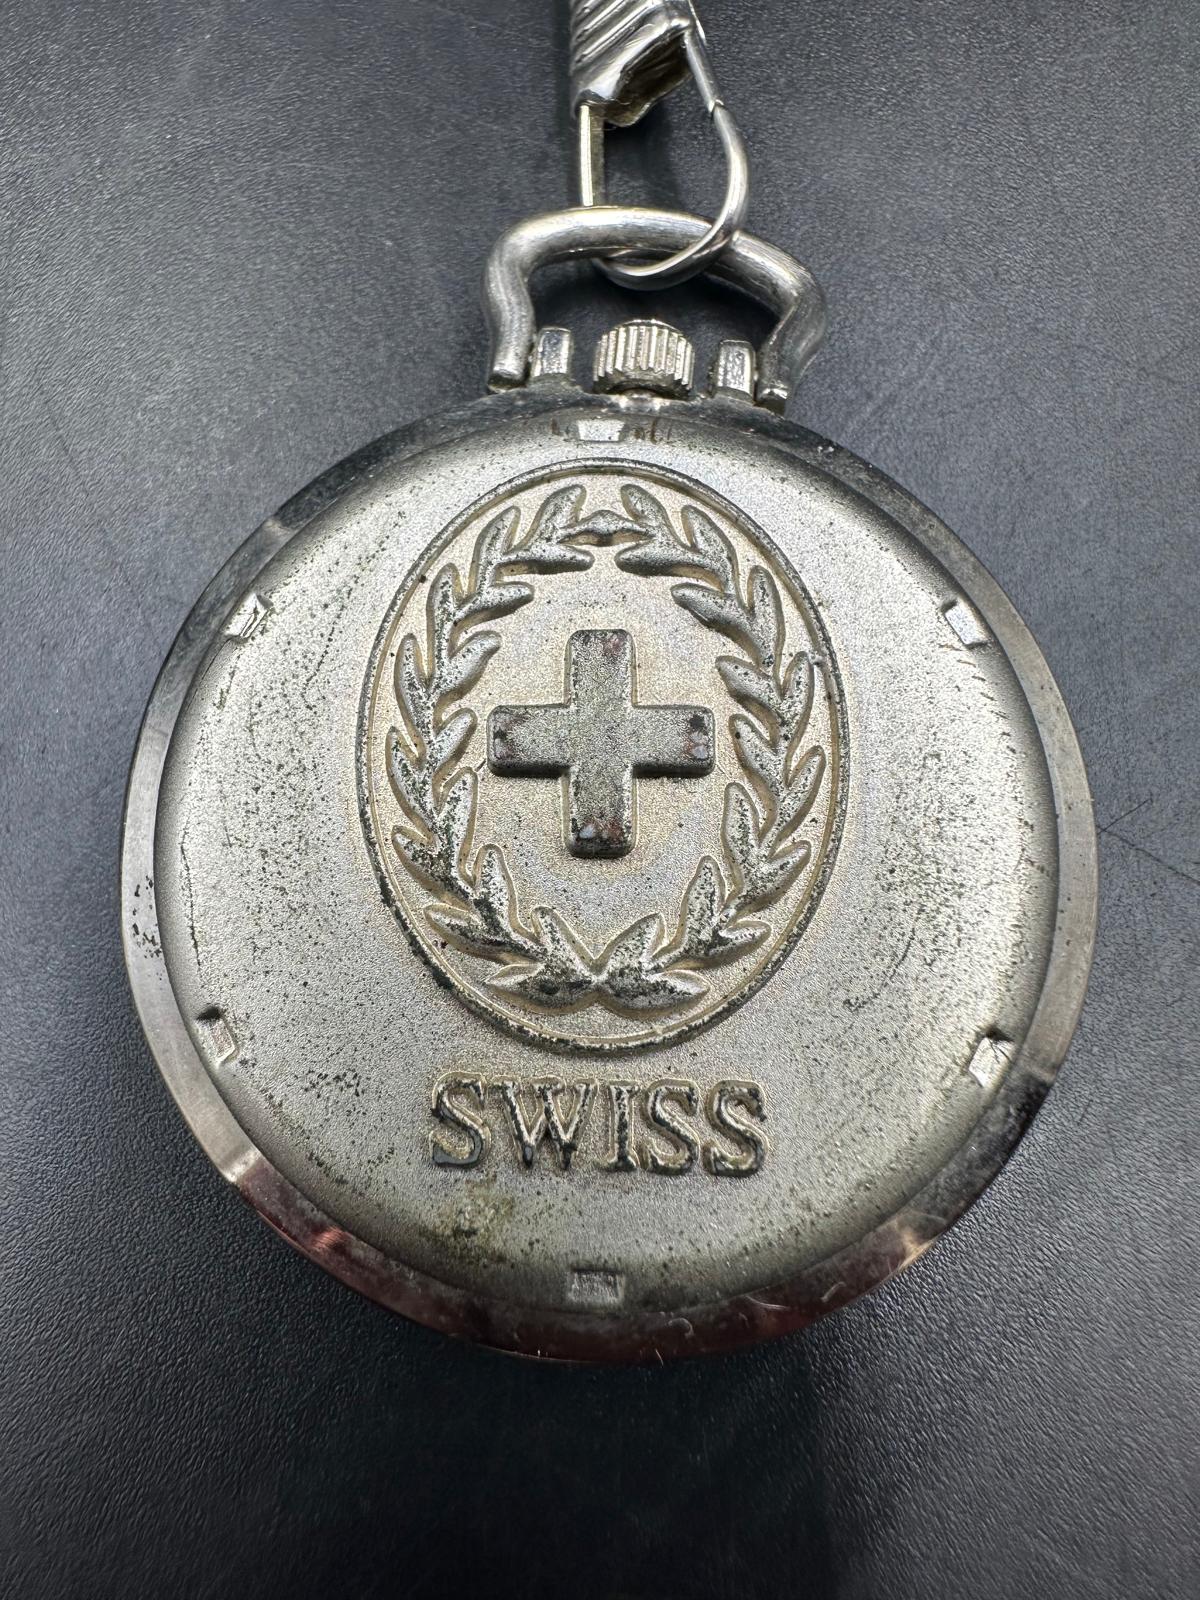 A Swizz Army pocket watch in leather carry case. - Image 4 of 4